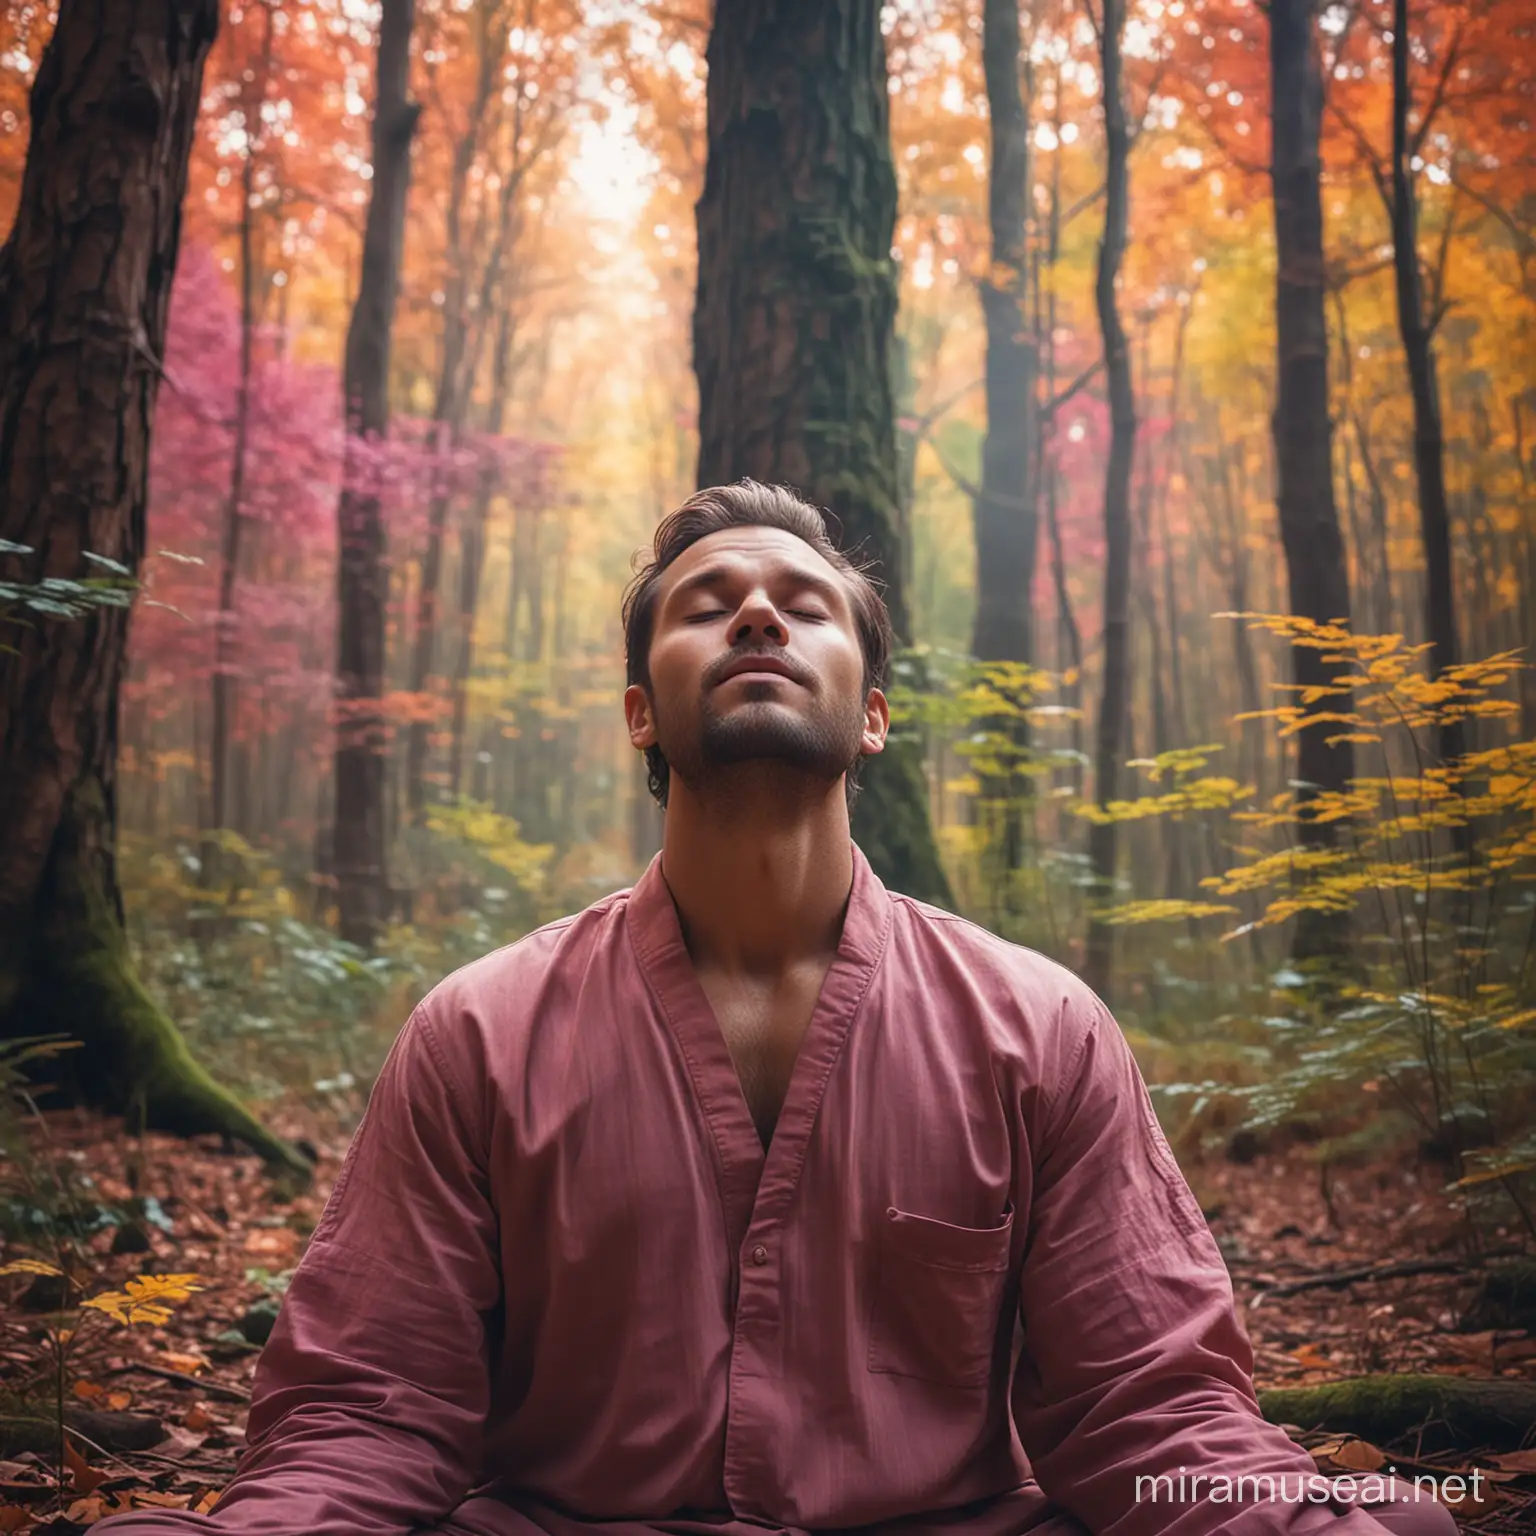 A man in a very relaxed state in very deep meditation. He has a calm look on his face and peaceful look as his eyes are closed. He is in a beatiful colorful yet mysterious forest